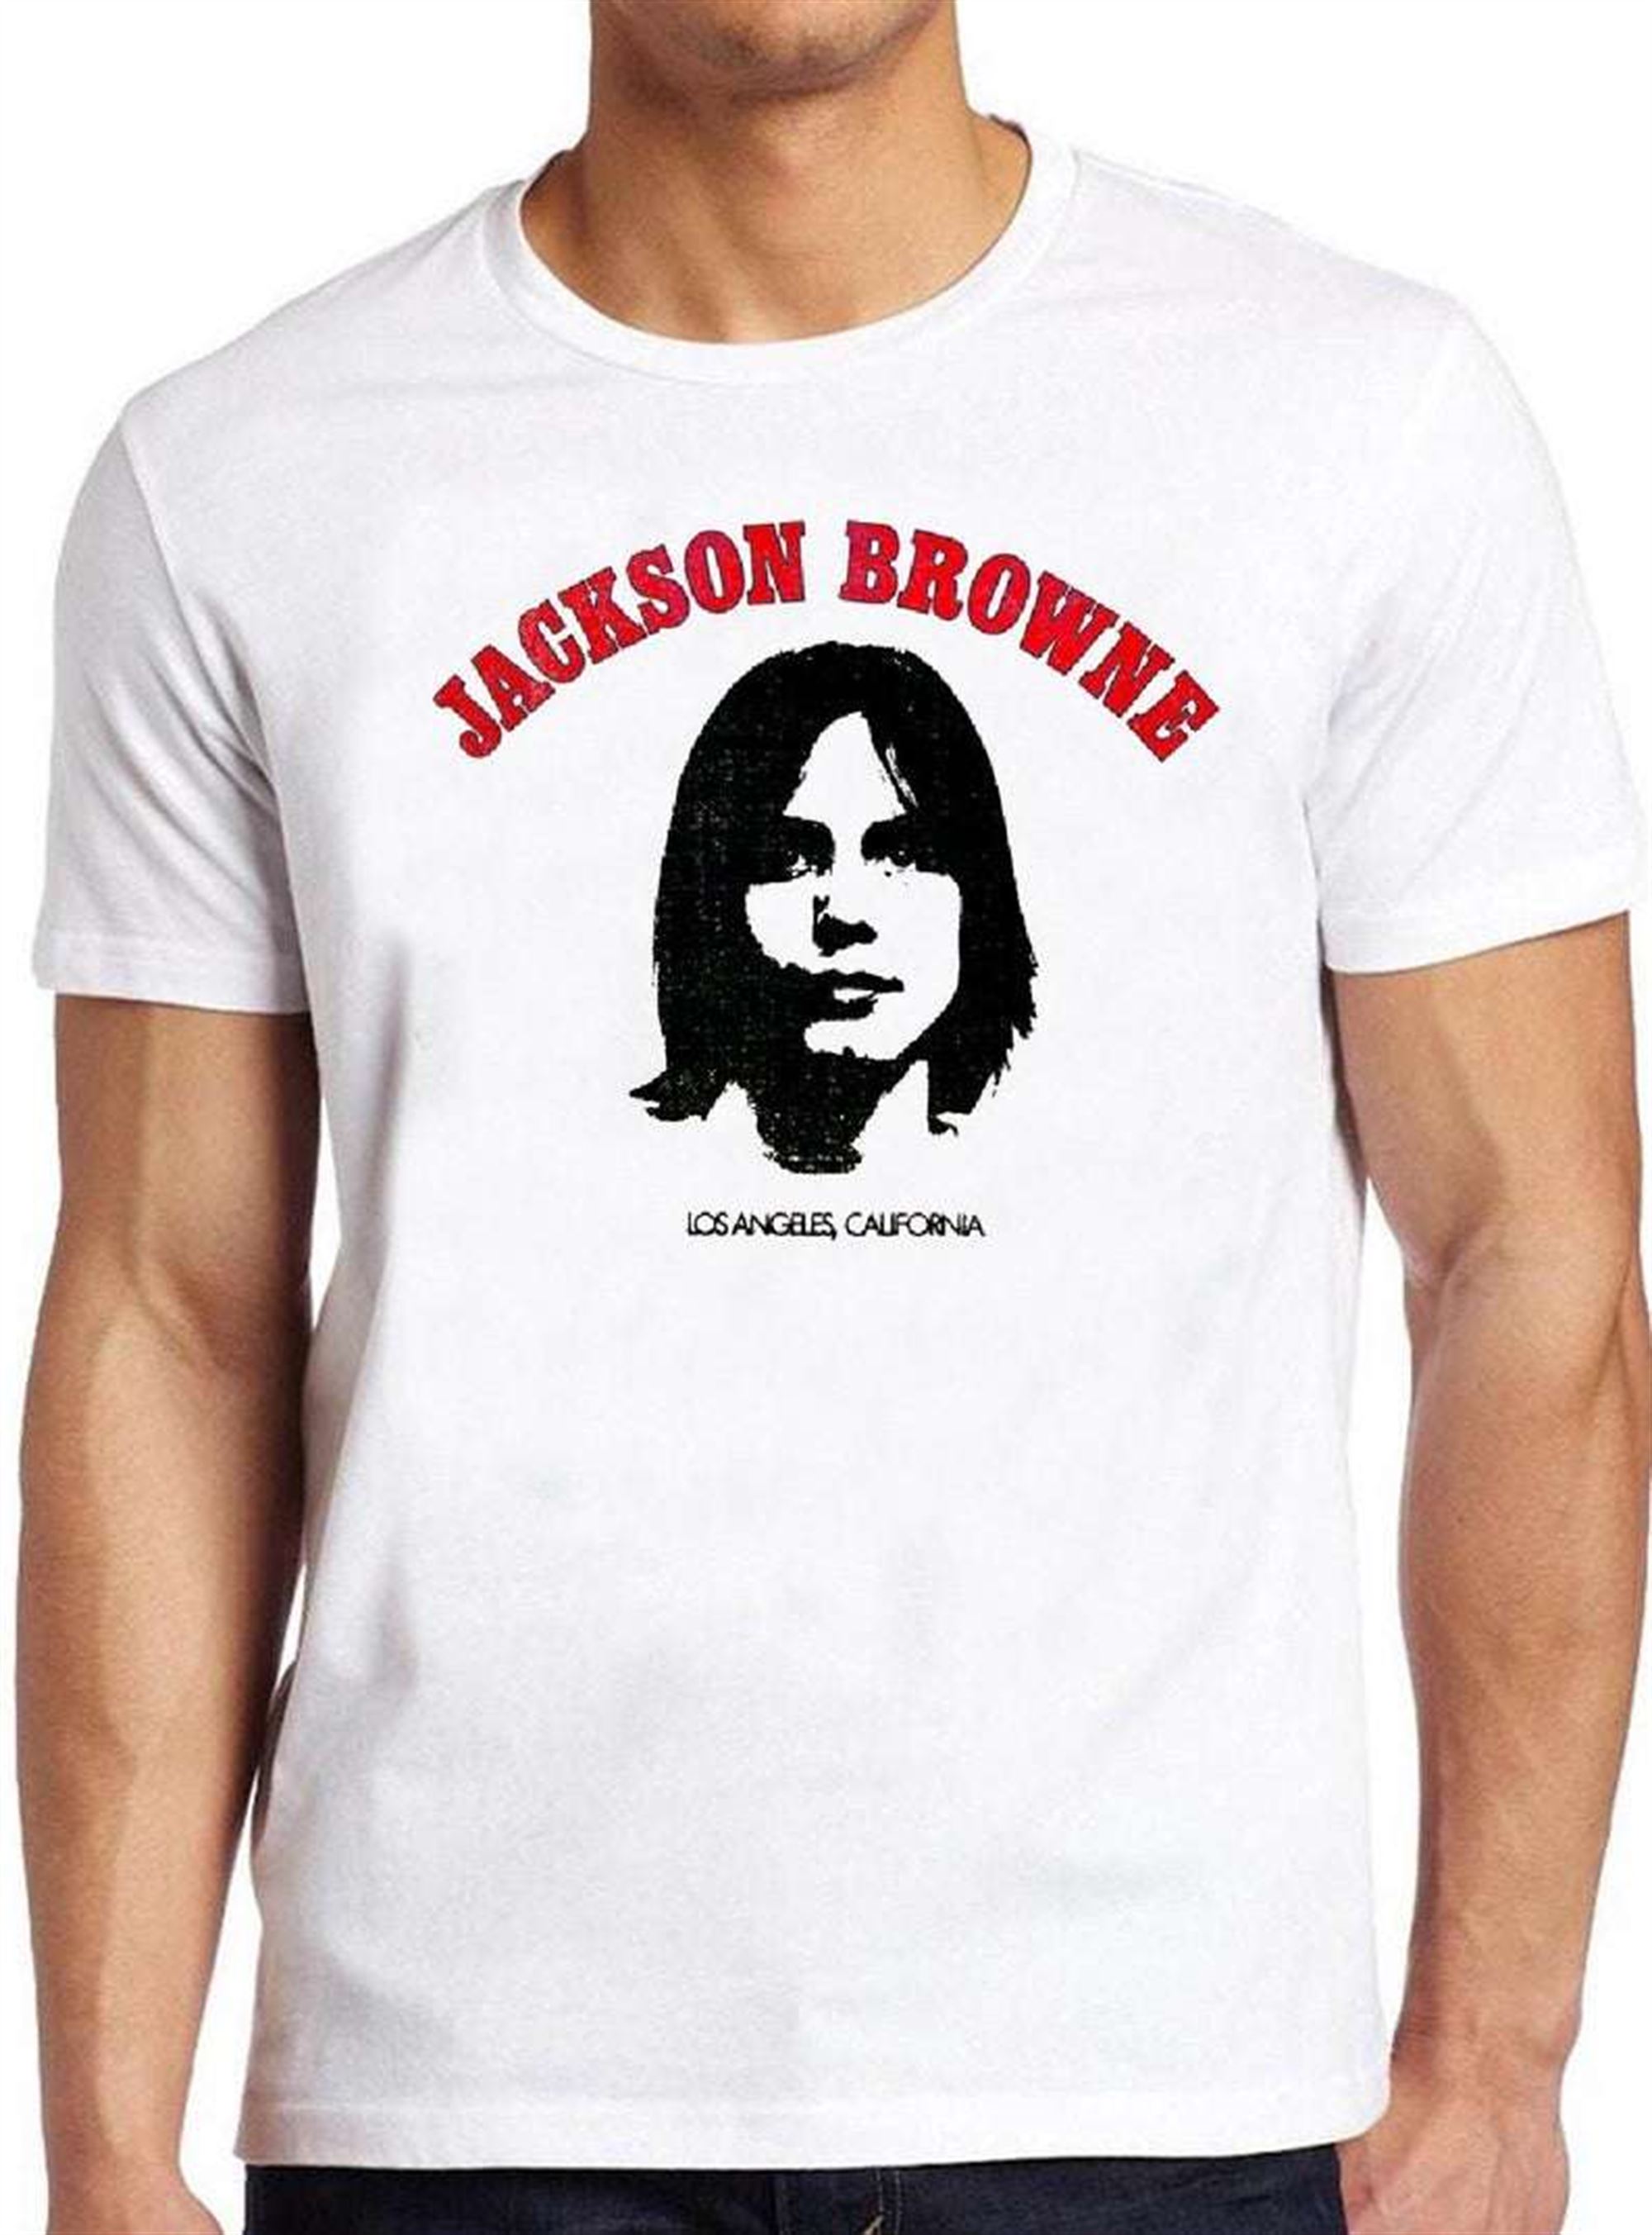 Jackson Browne T Shirt Los Angeles California Full Size Up To 5xl